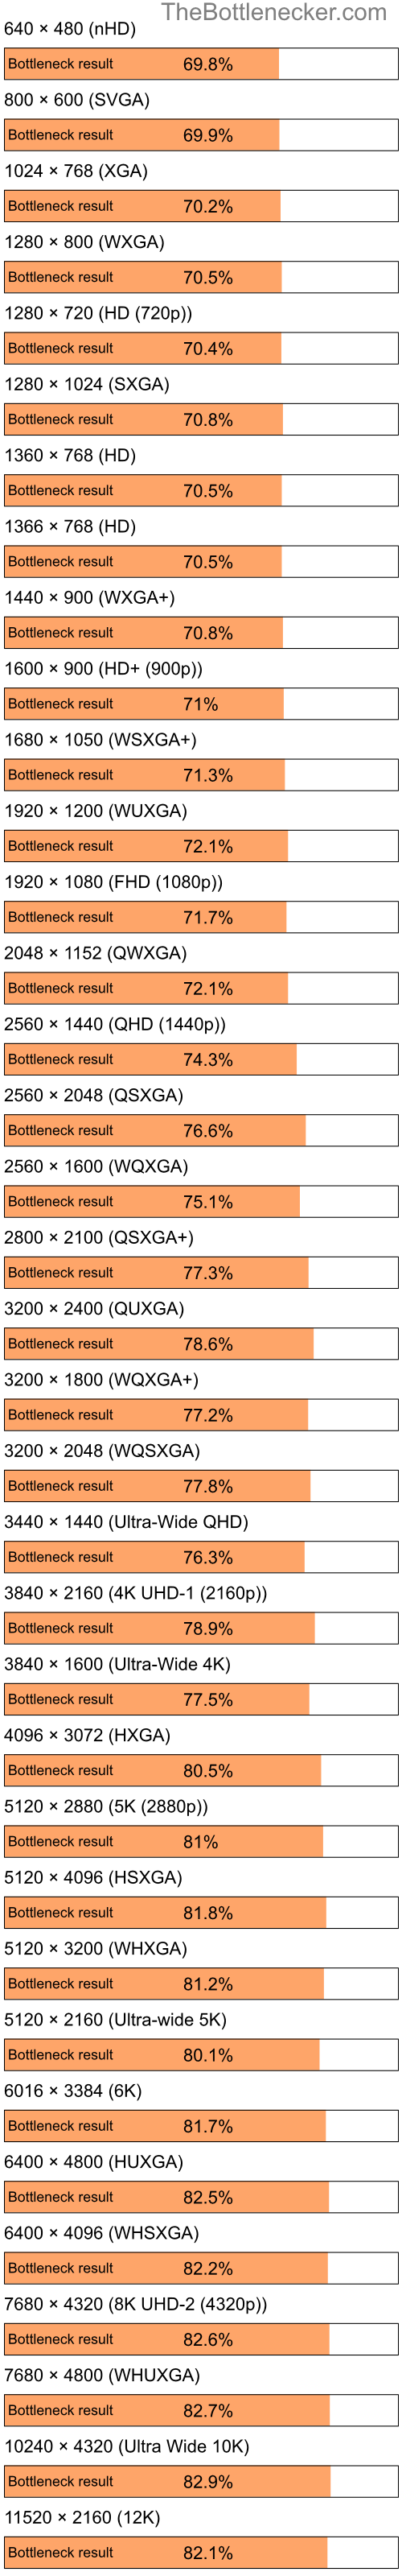 Bottleneck results by resolution for Intel Pentium 4 and NVIDIA GeForce 8300 in Graphic Card Intense Tasks